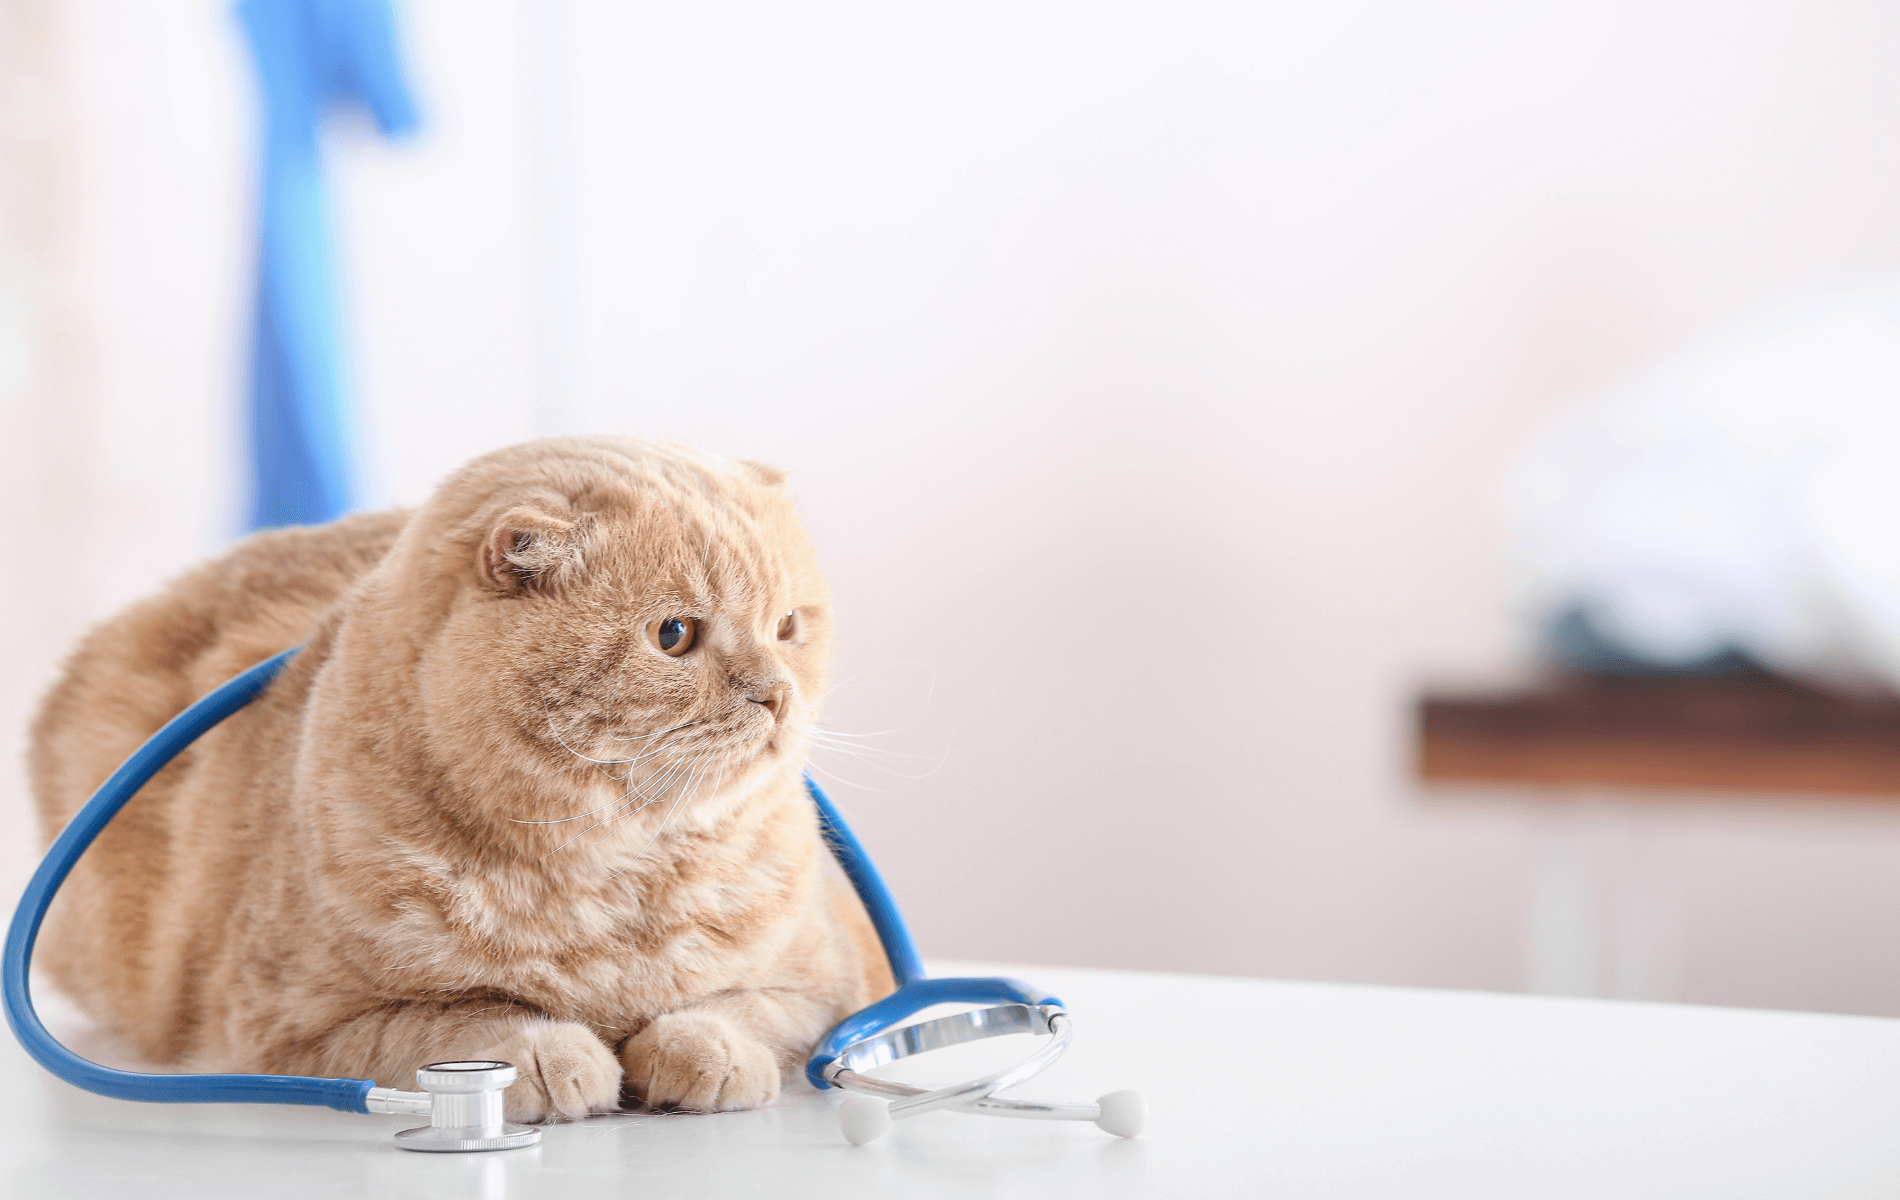 A cat with a stethoscope